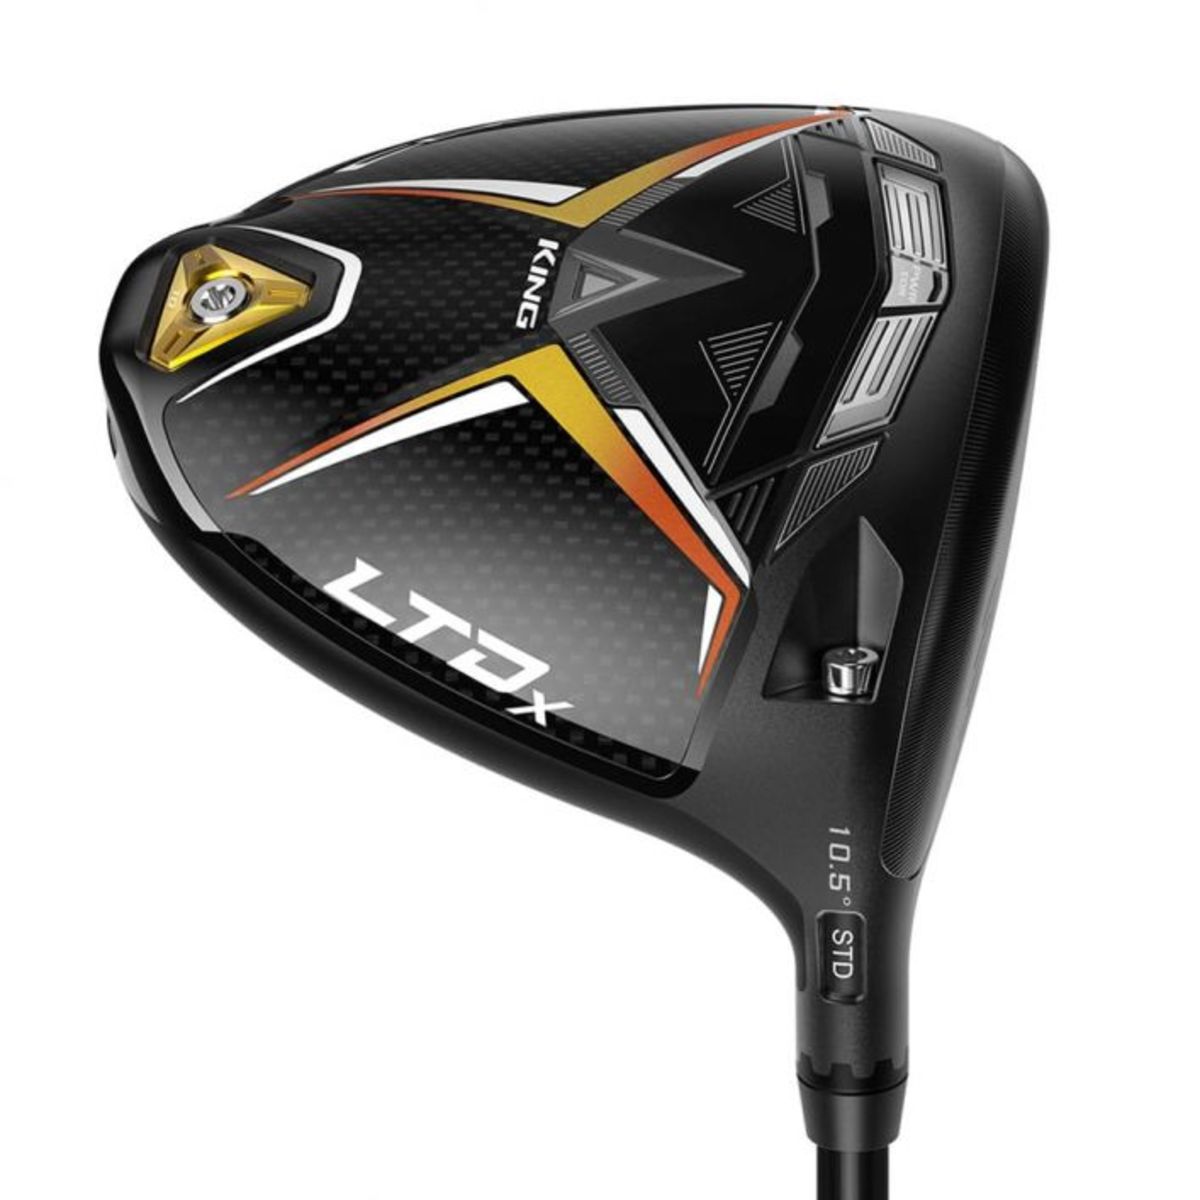 Shop the latest Cobra golf drivers - like the LTDx - on Morning Read's online pro shop.